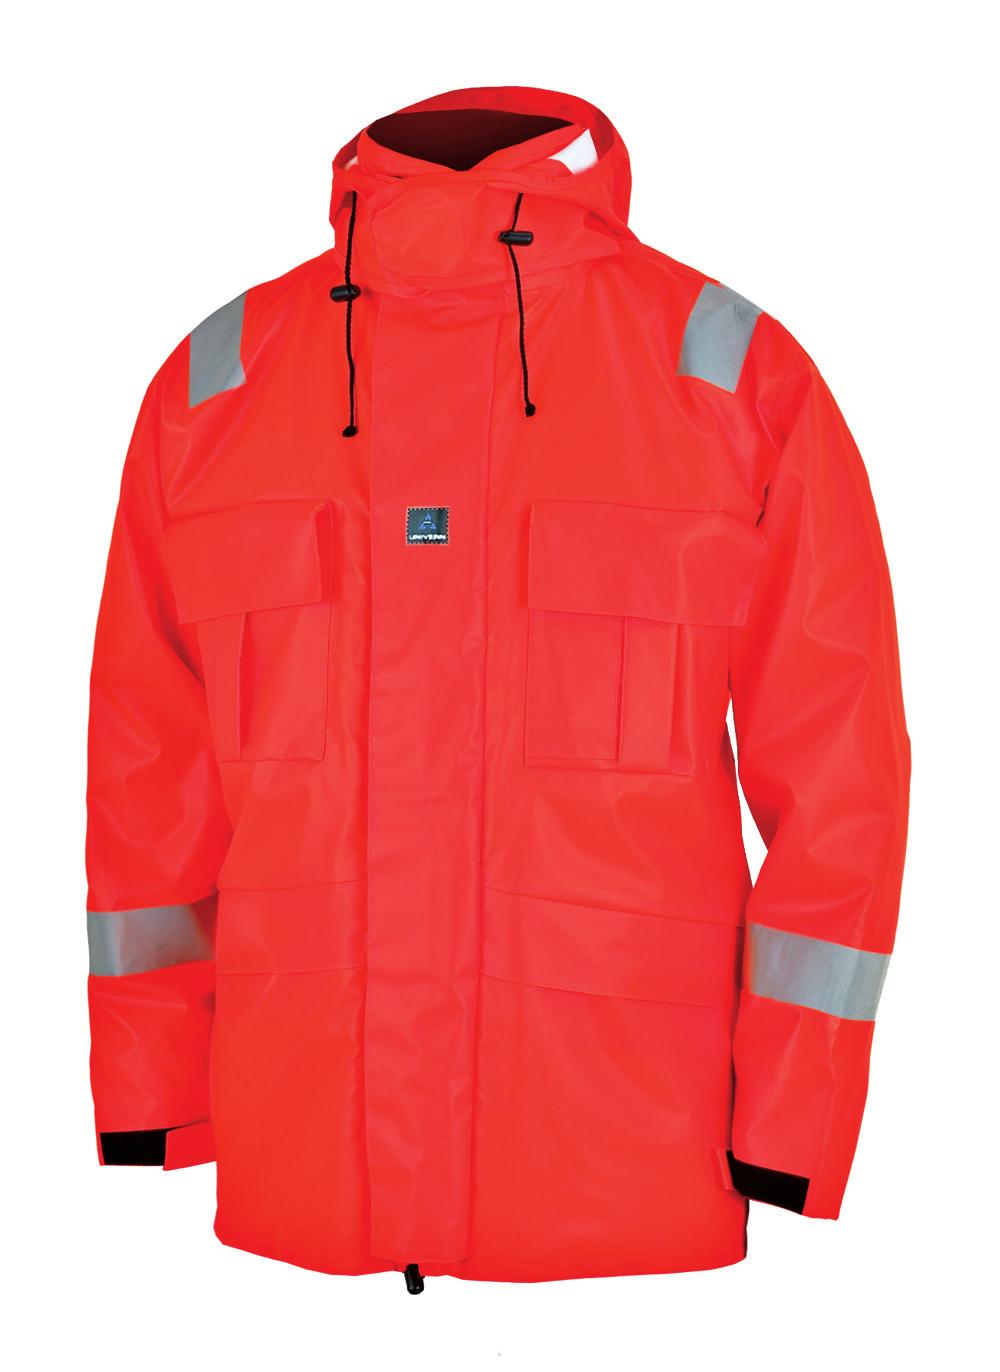 The waterproof clothing in this series is produced in a soft knitted polyester PU.